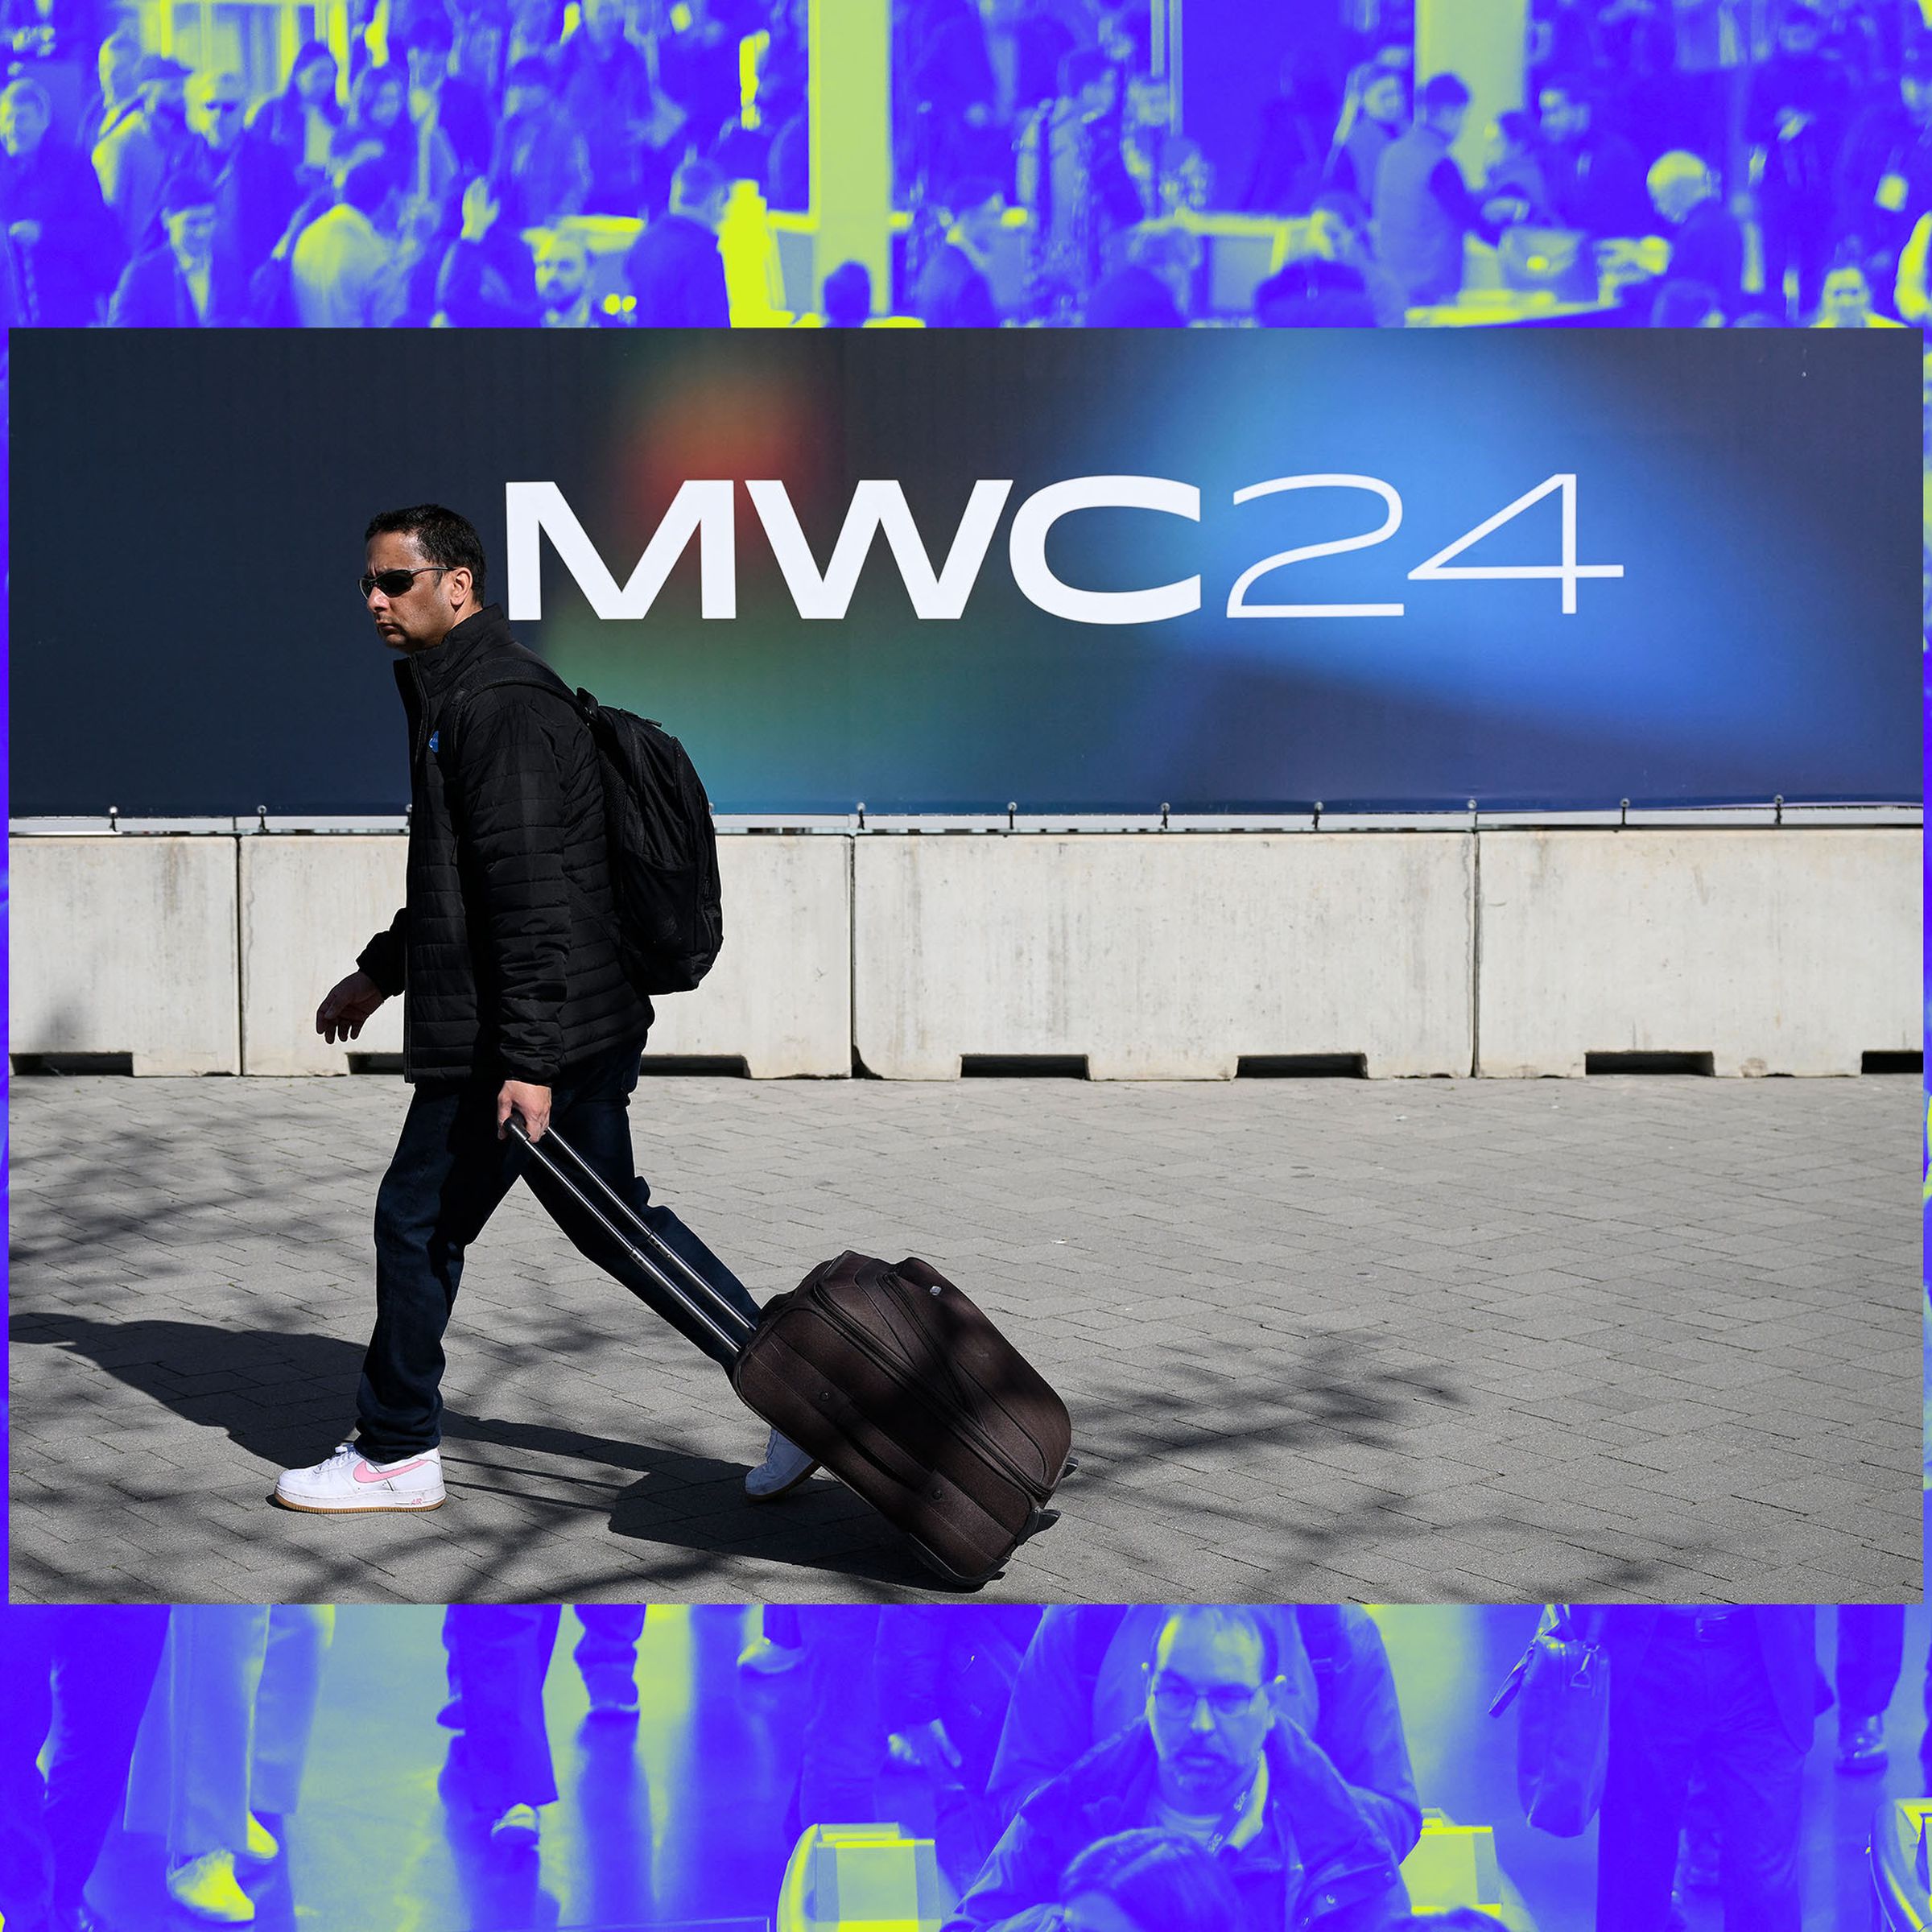 An image of a person walking with a MWC sign in the background.